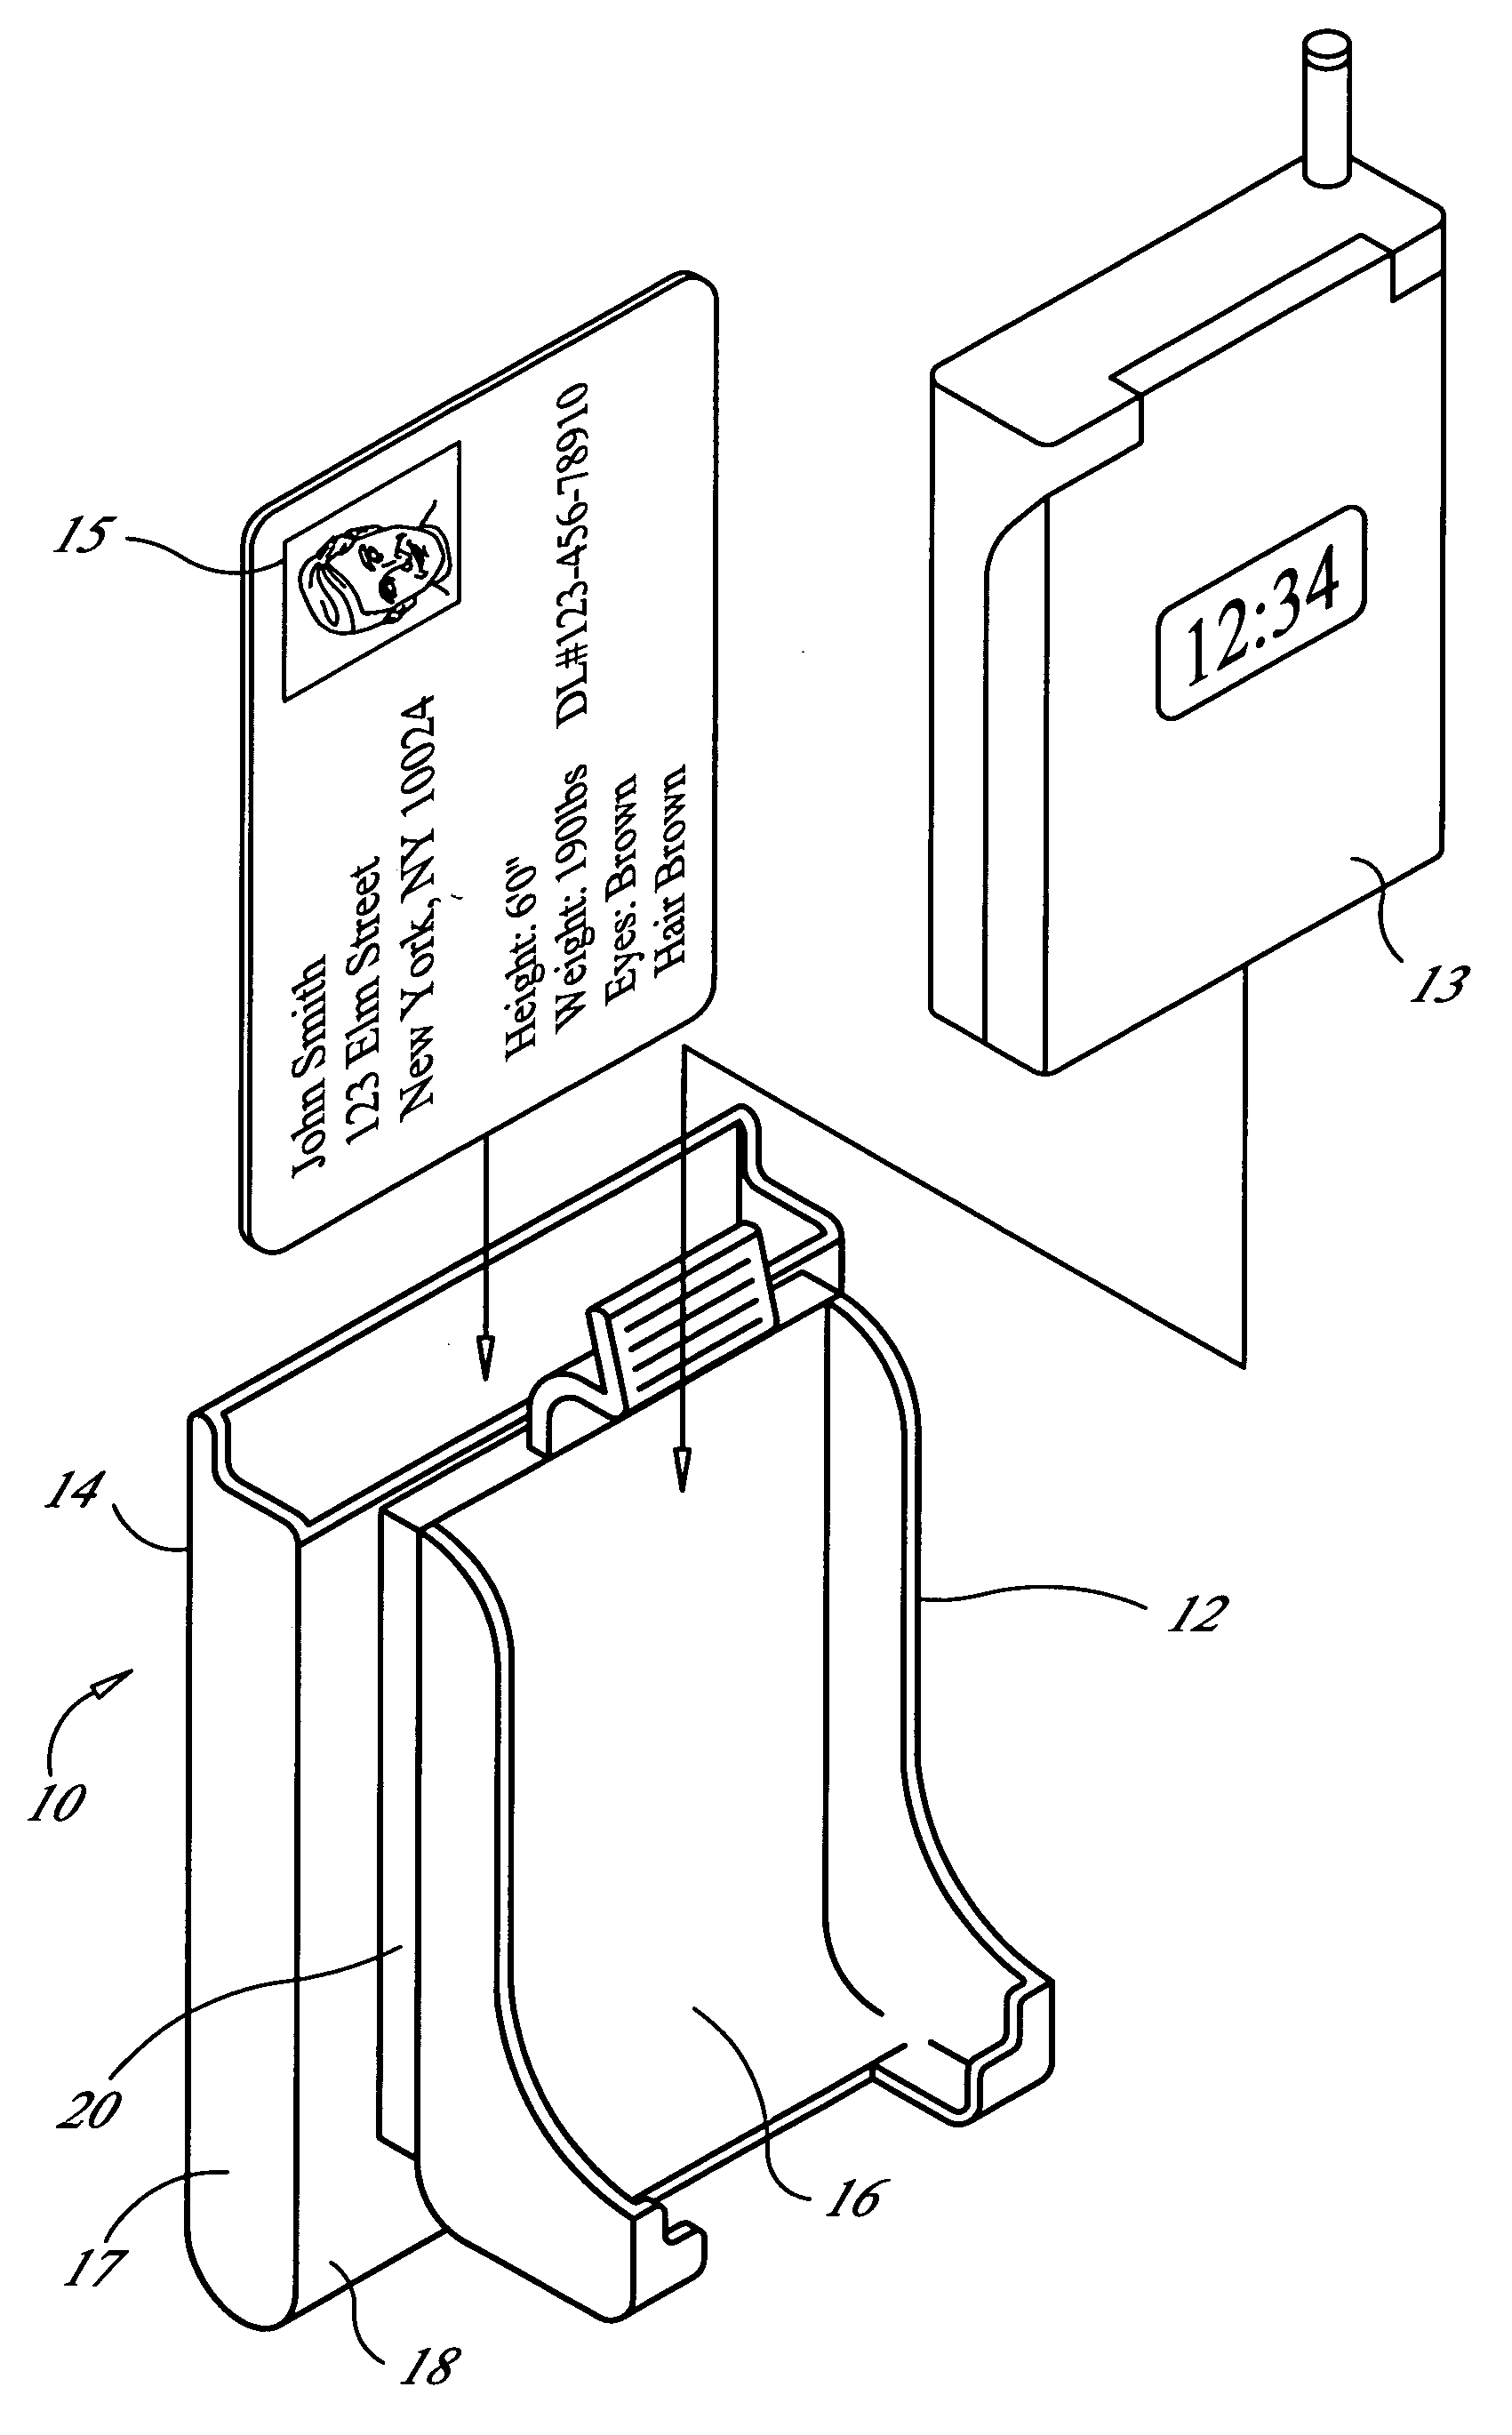 Card carrying apparatus with cell phone cradle attachment